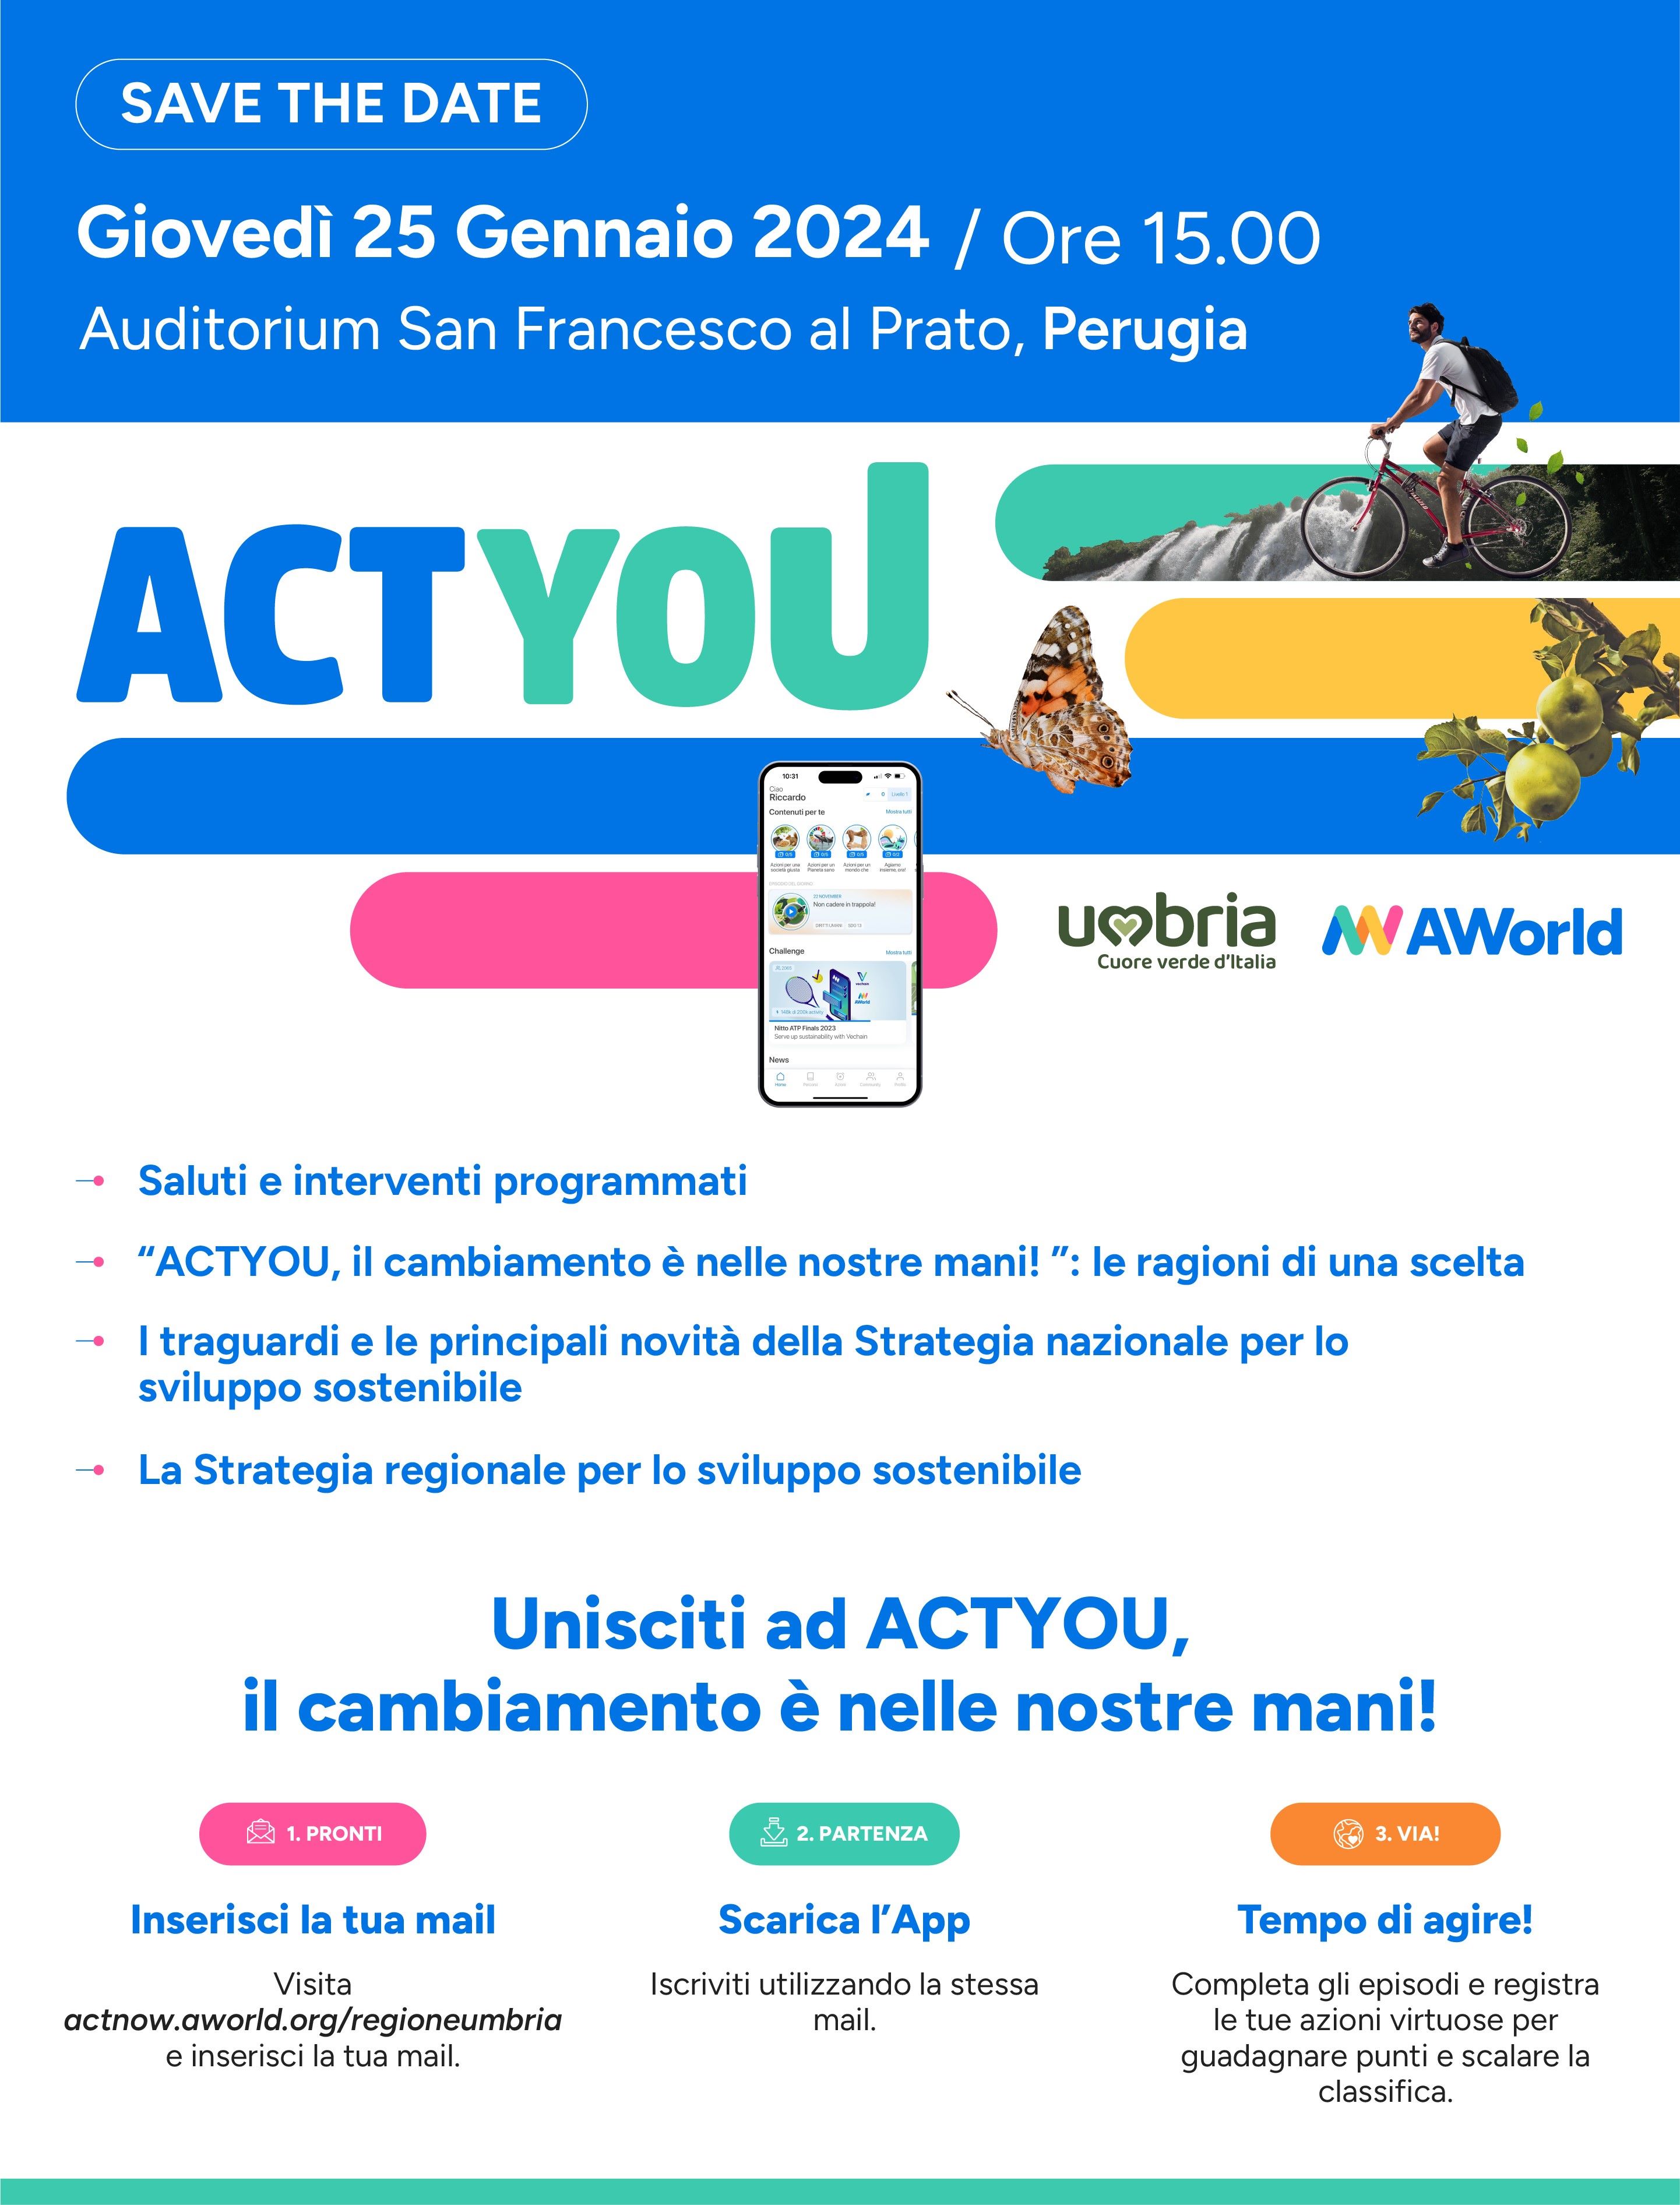 ACTYOU SAVE THE DATE 25GENNAIO 1